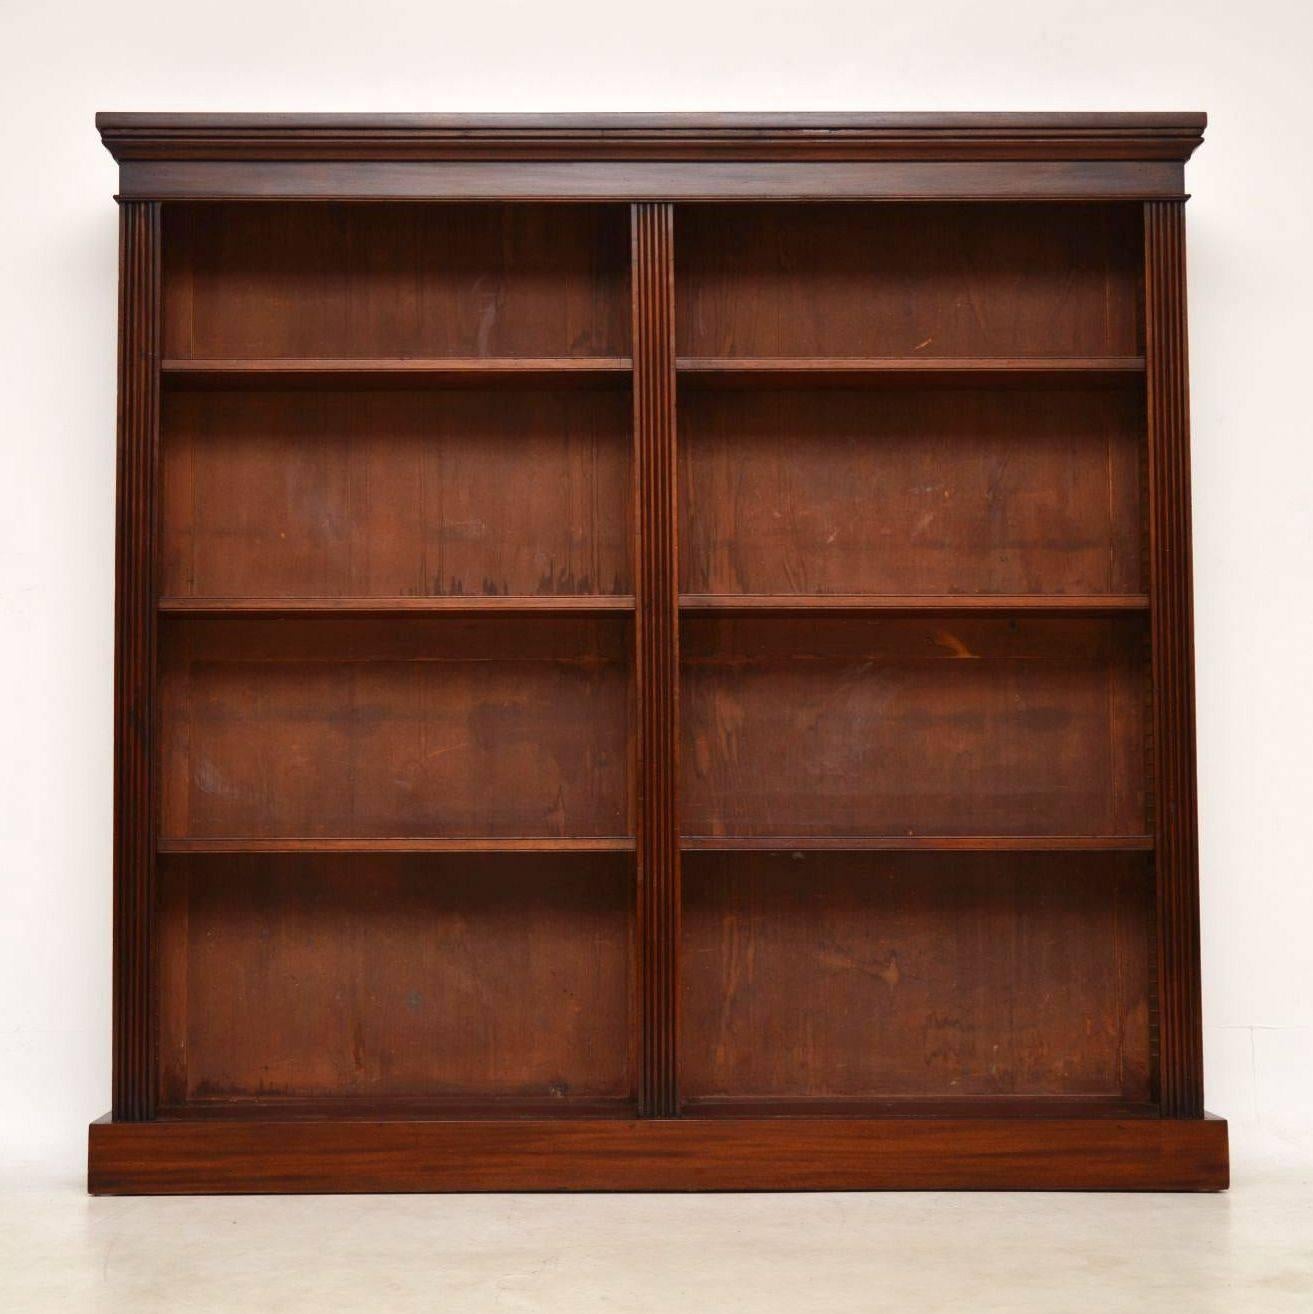 This antique Victorian mahogany open bookcase is very slim in depth, so won’t hold particularly deep books. It’s very smart looking with two compartments that have fully adjustable shelves. The front edges are reeded and it sits on a plinth base.